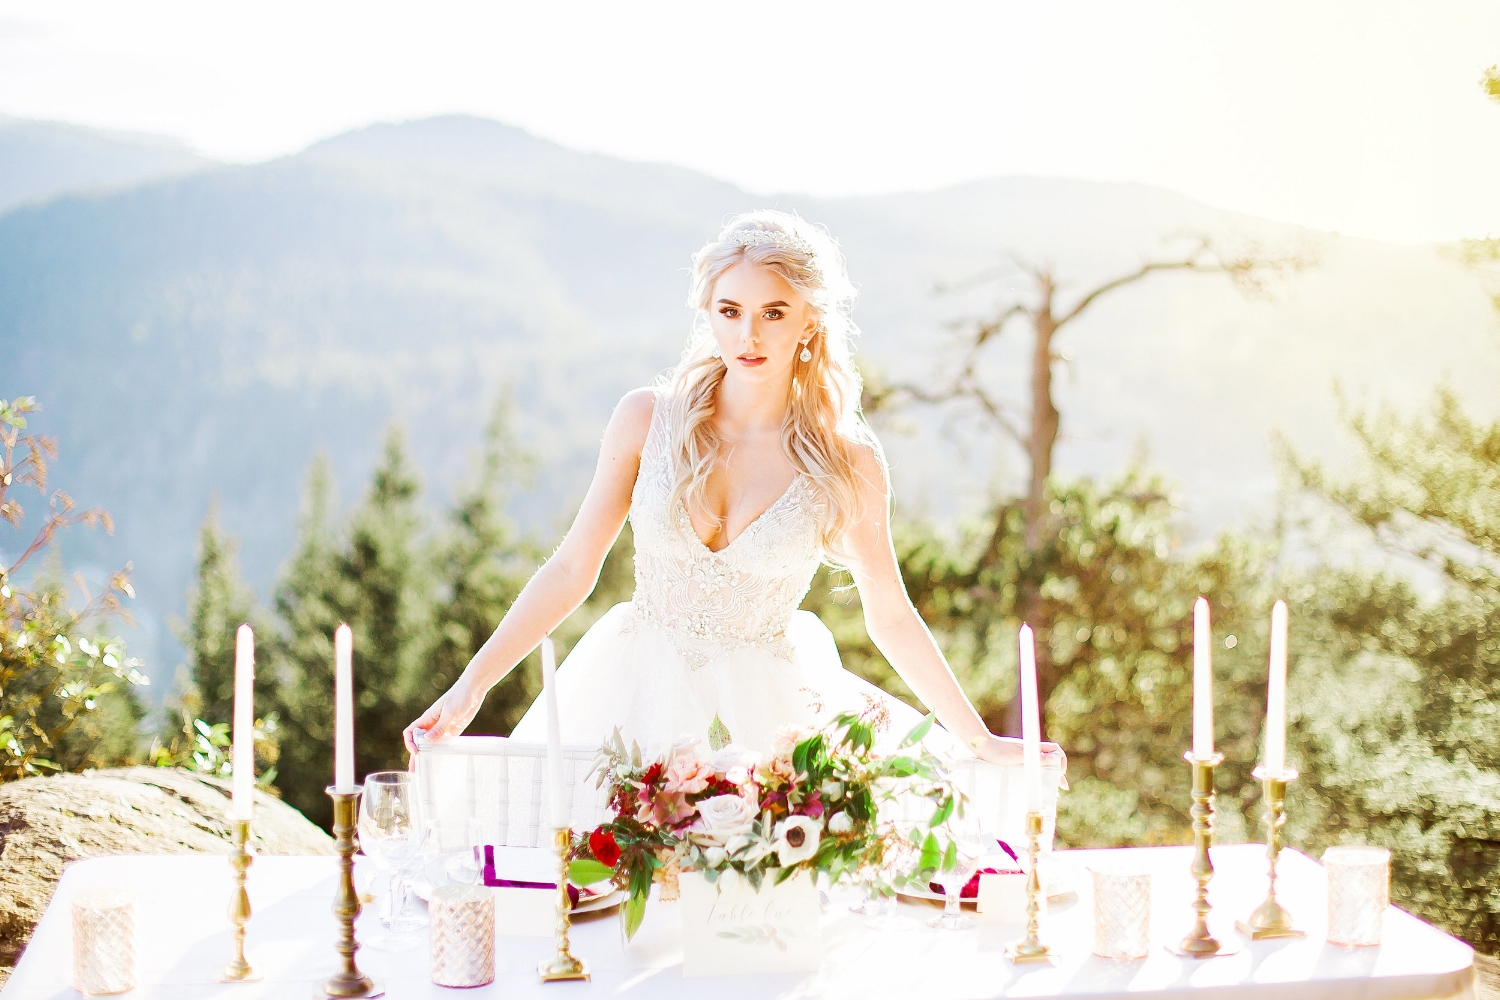 Styled Shoot Featured on Wedding Chicks